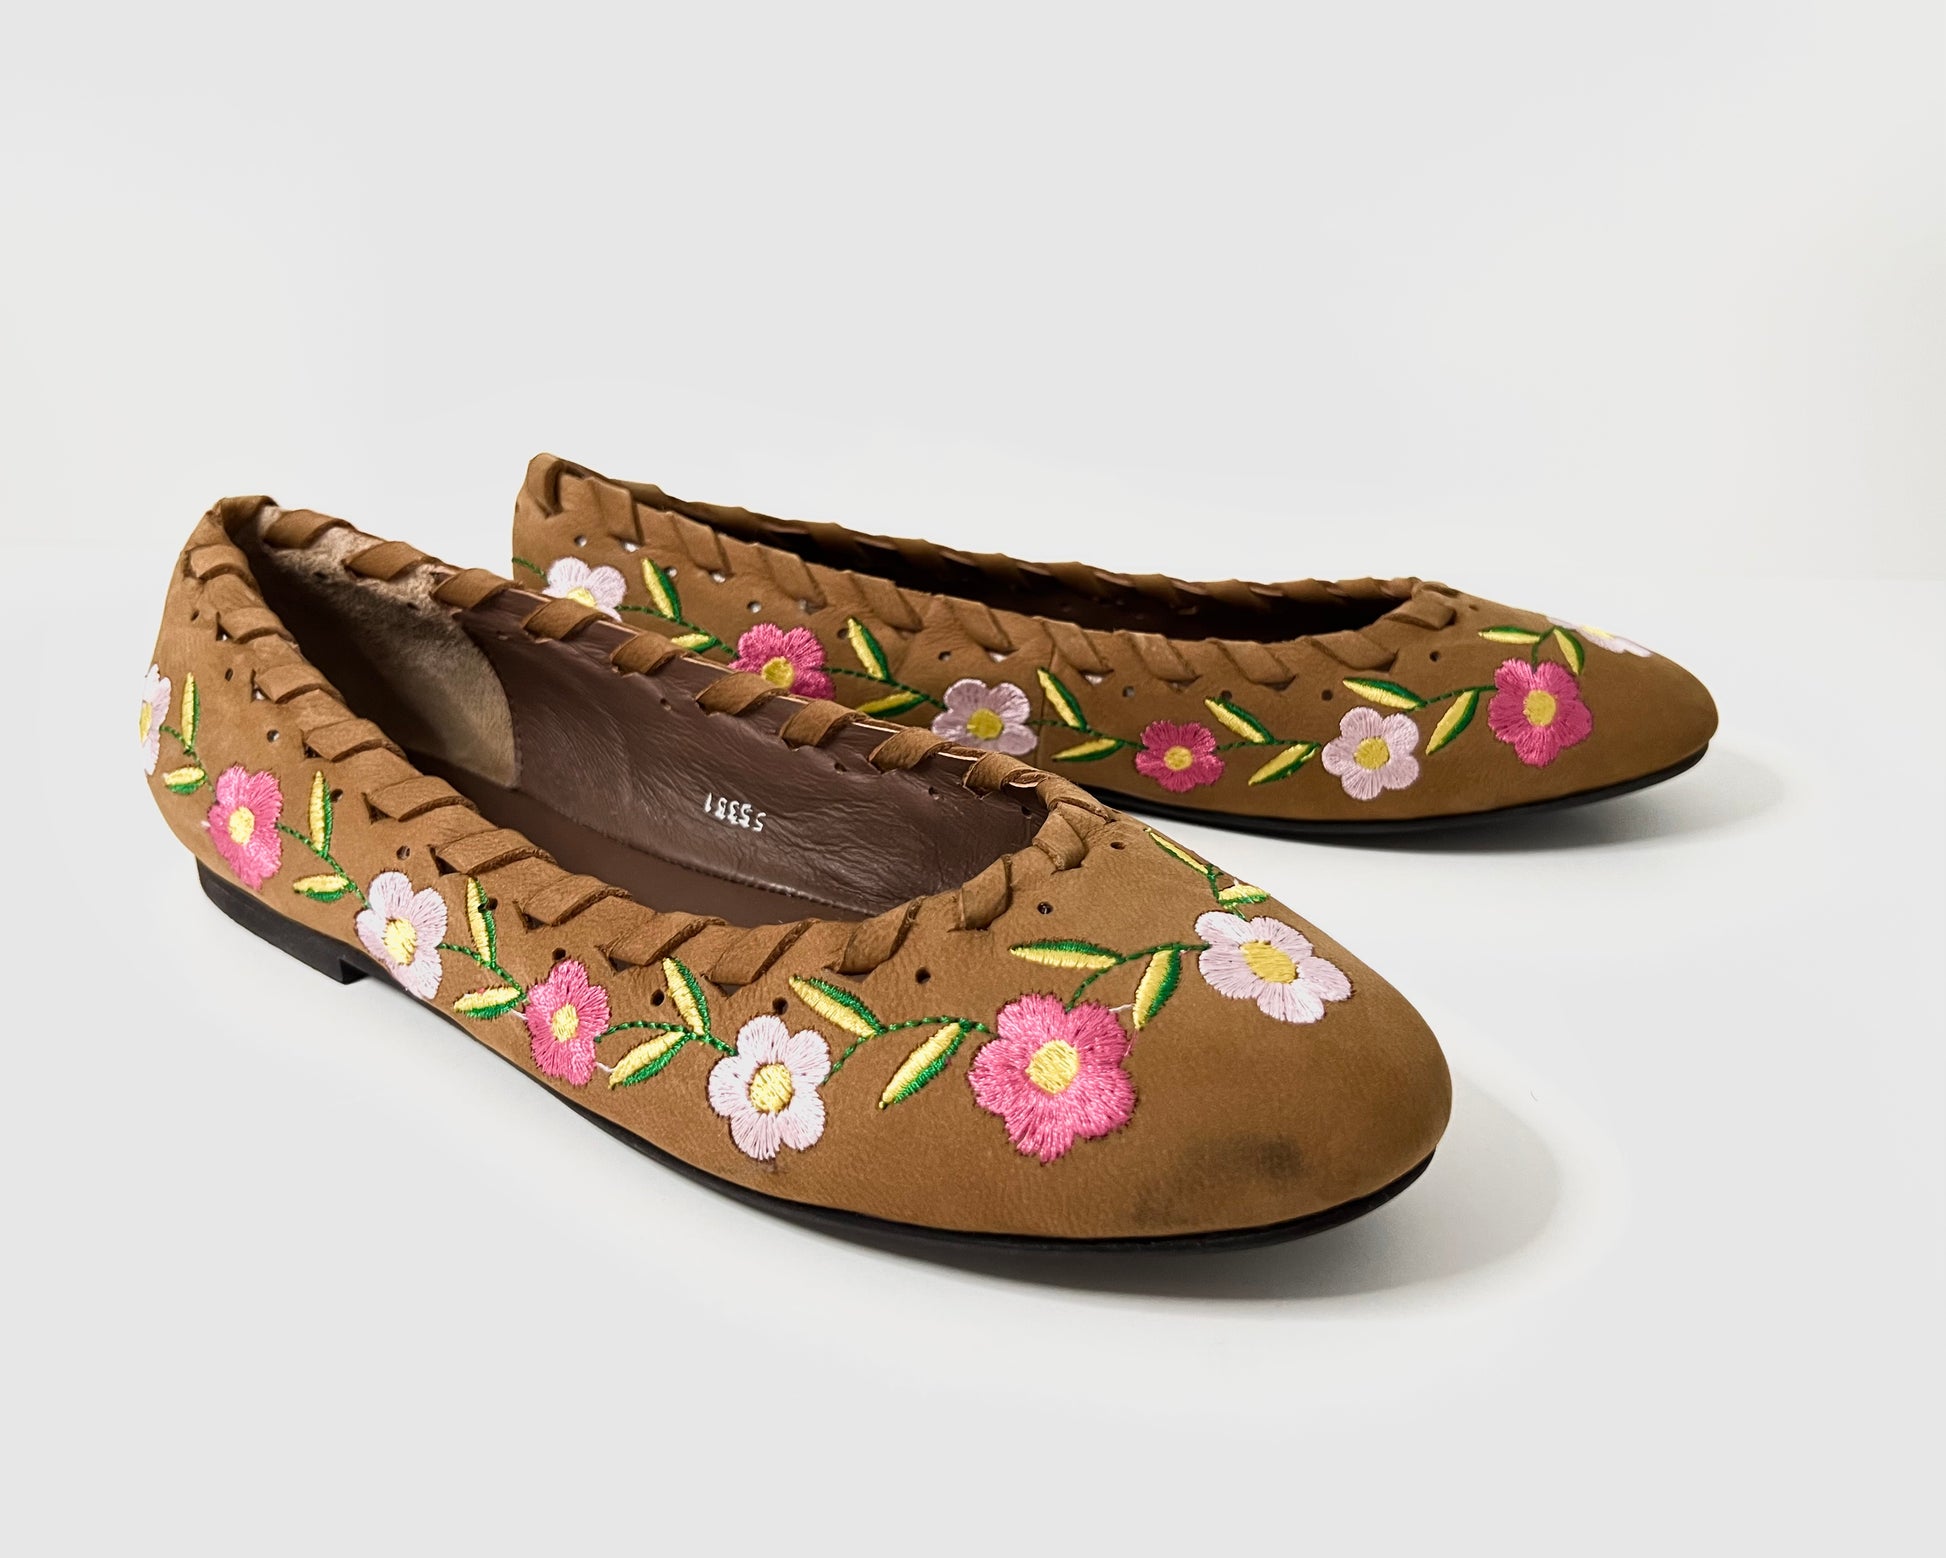 oobash June tan leather flower embroidered ballerina for ladies girl women